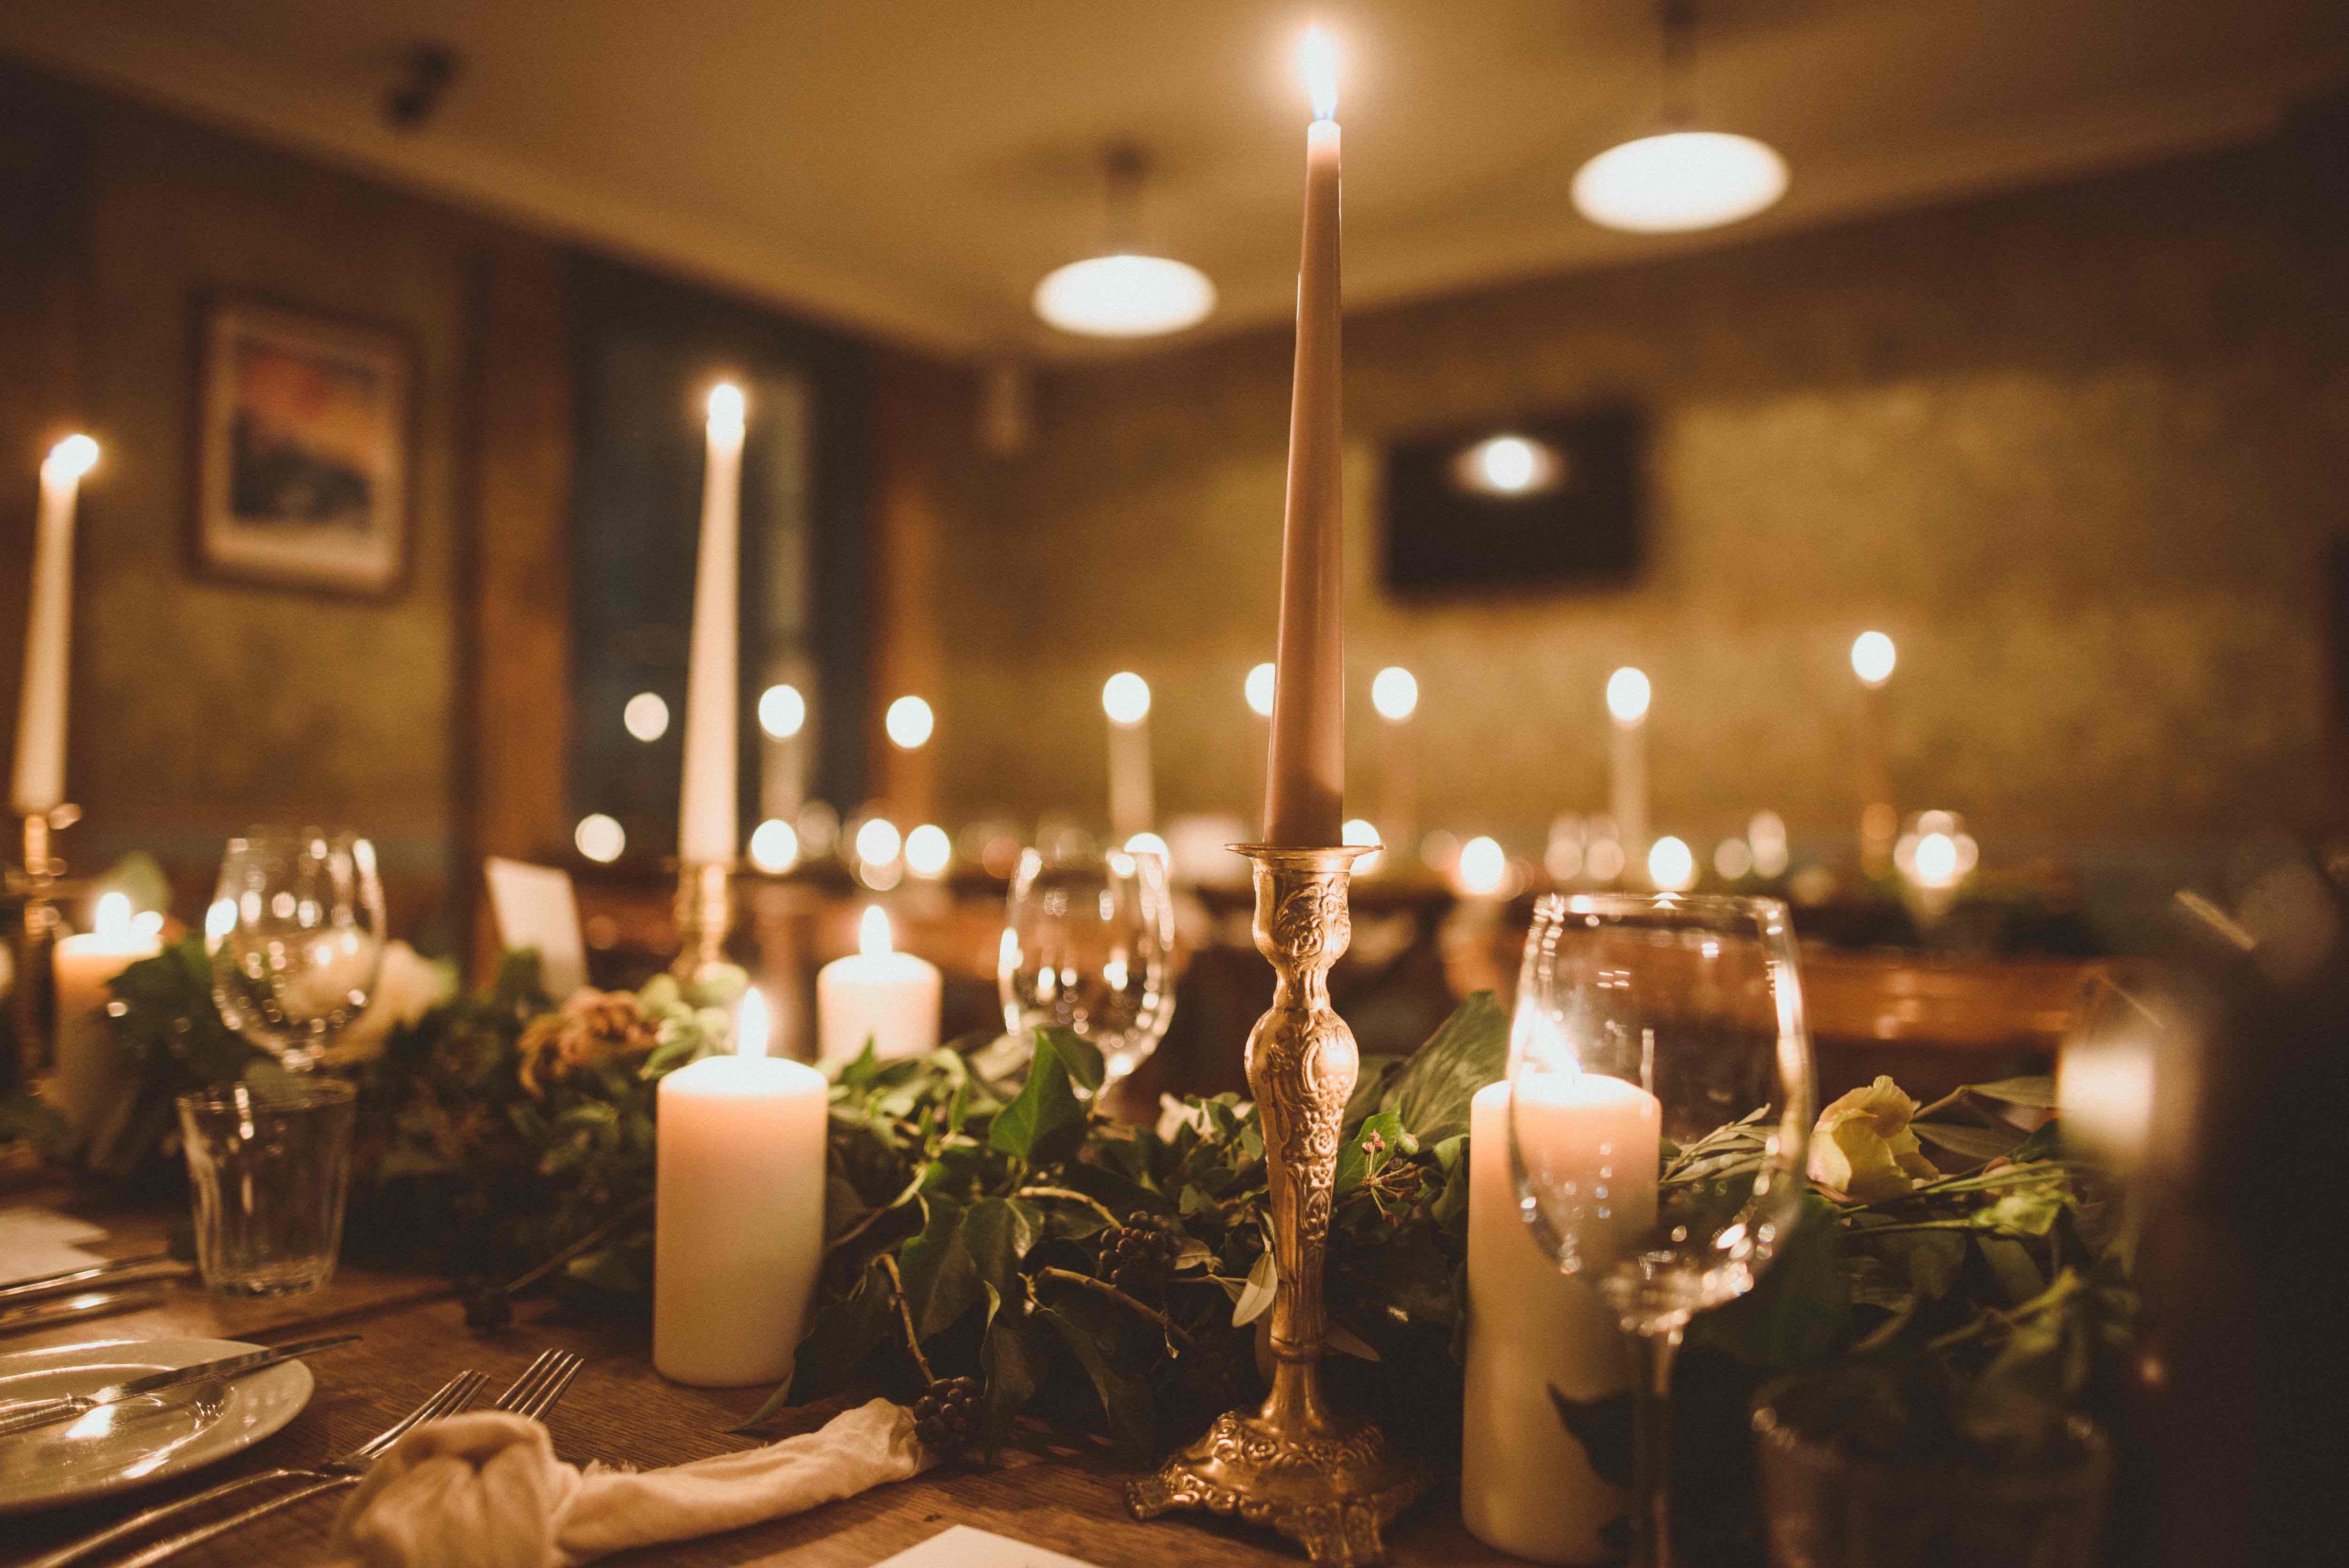 Warm, inviting, cosy touches to this winter wedding at The Orange Public House & Hotel, Belgravia, London